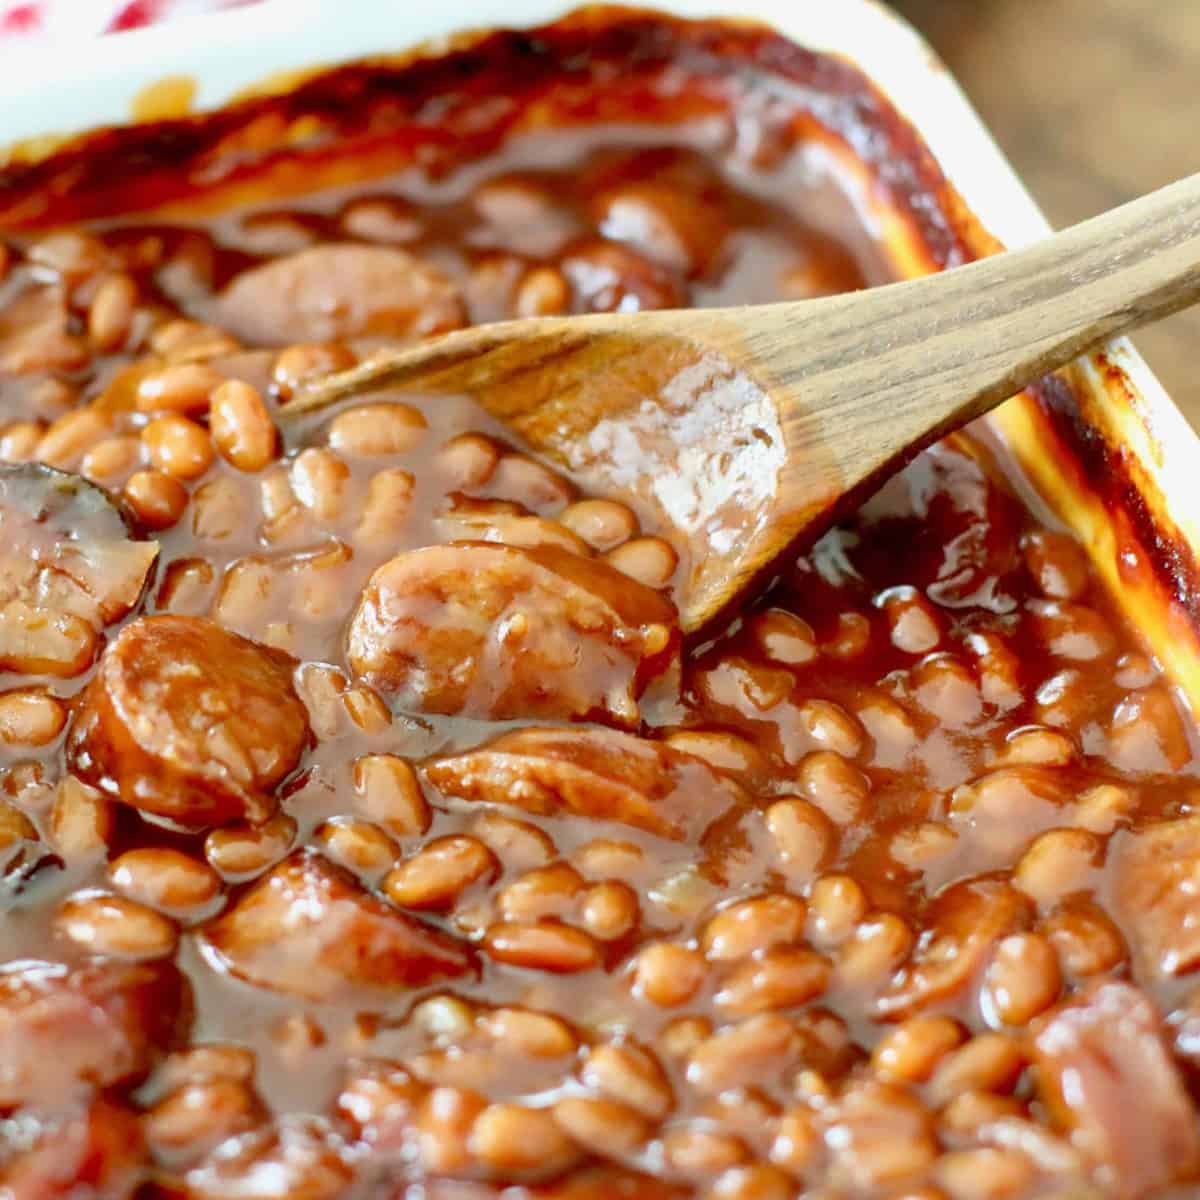 Bushs baked beans with sausage recipe